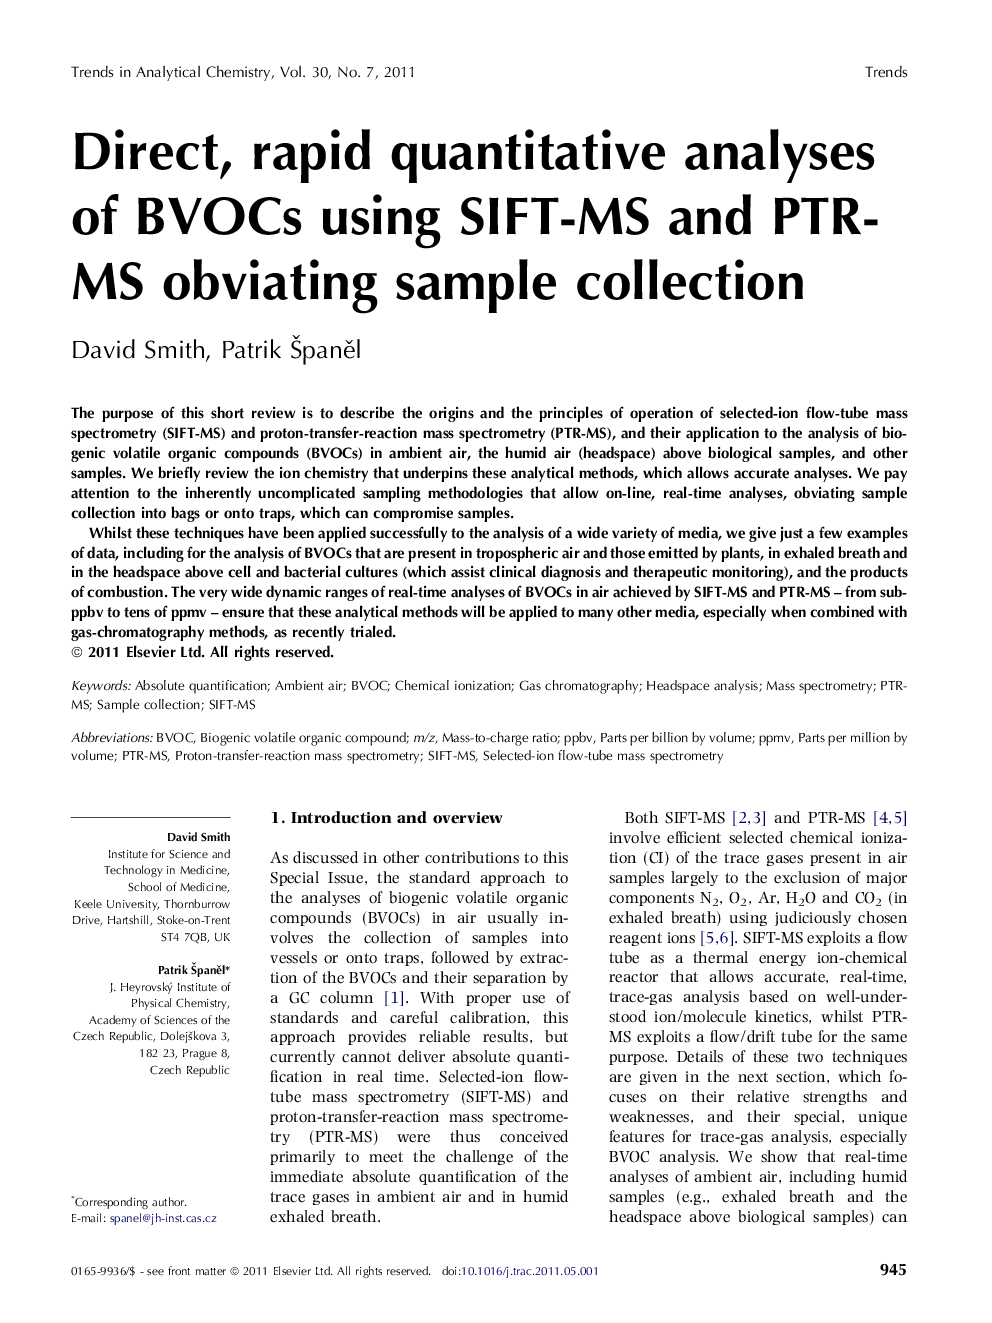 Direct, rapid quantitative analyses of BVOCs using SIFT-MS and PTR-MS obviating sample collection